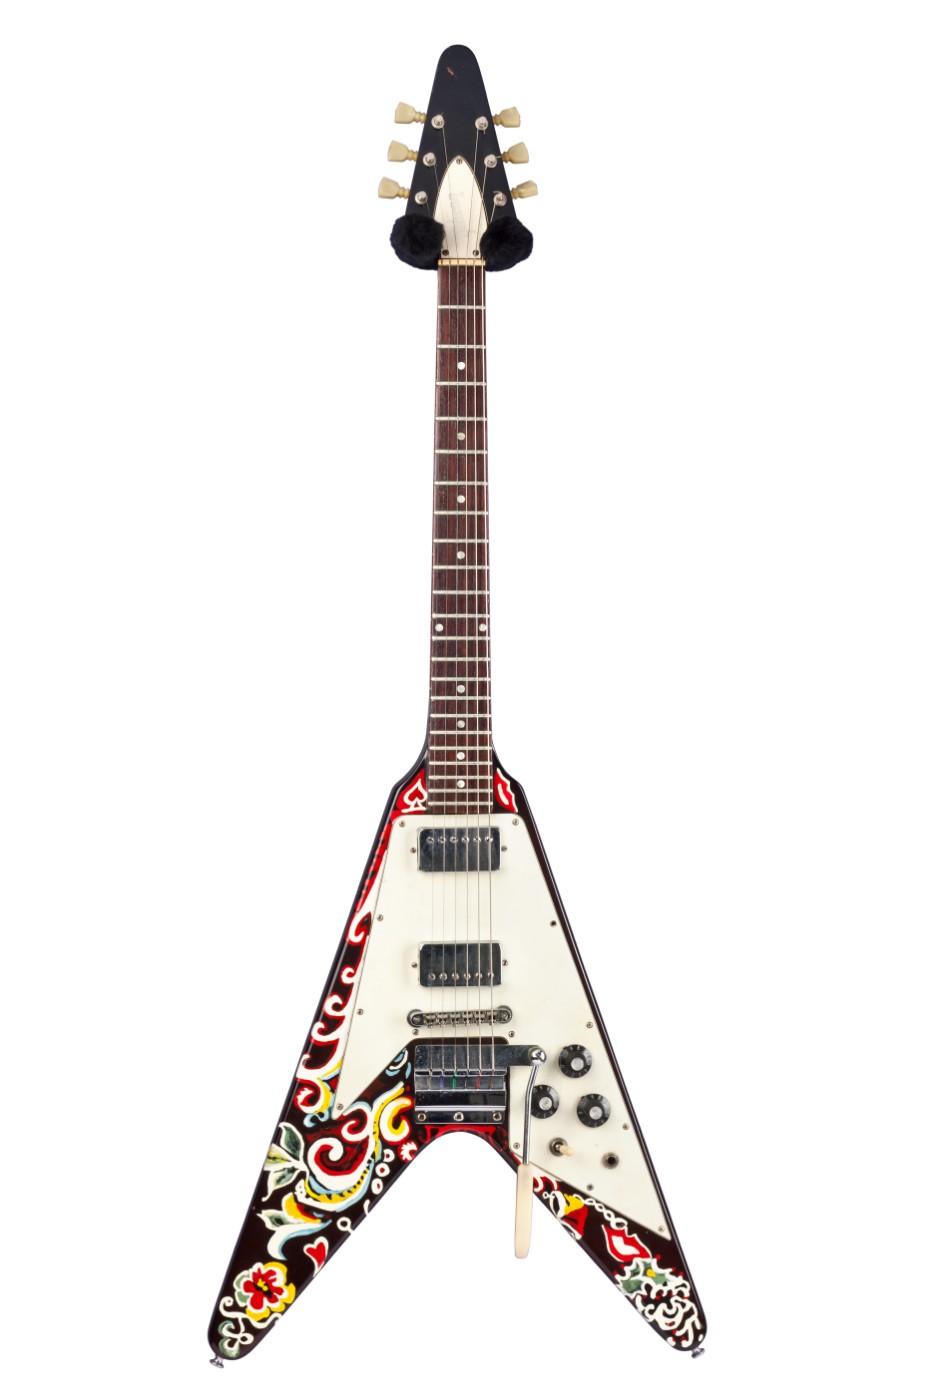 Jimi Hendrix owned and played this Gibson Flying V extensively from 1967 to 1969. Hendrix painted the instrument himself using nail polish.